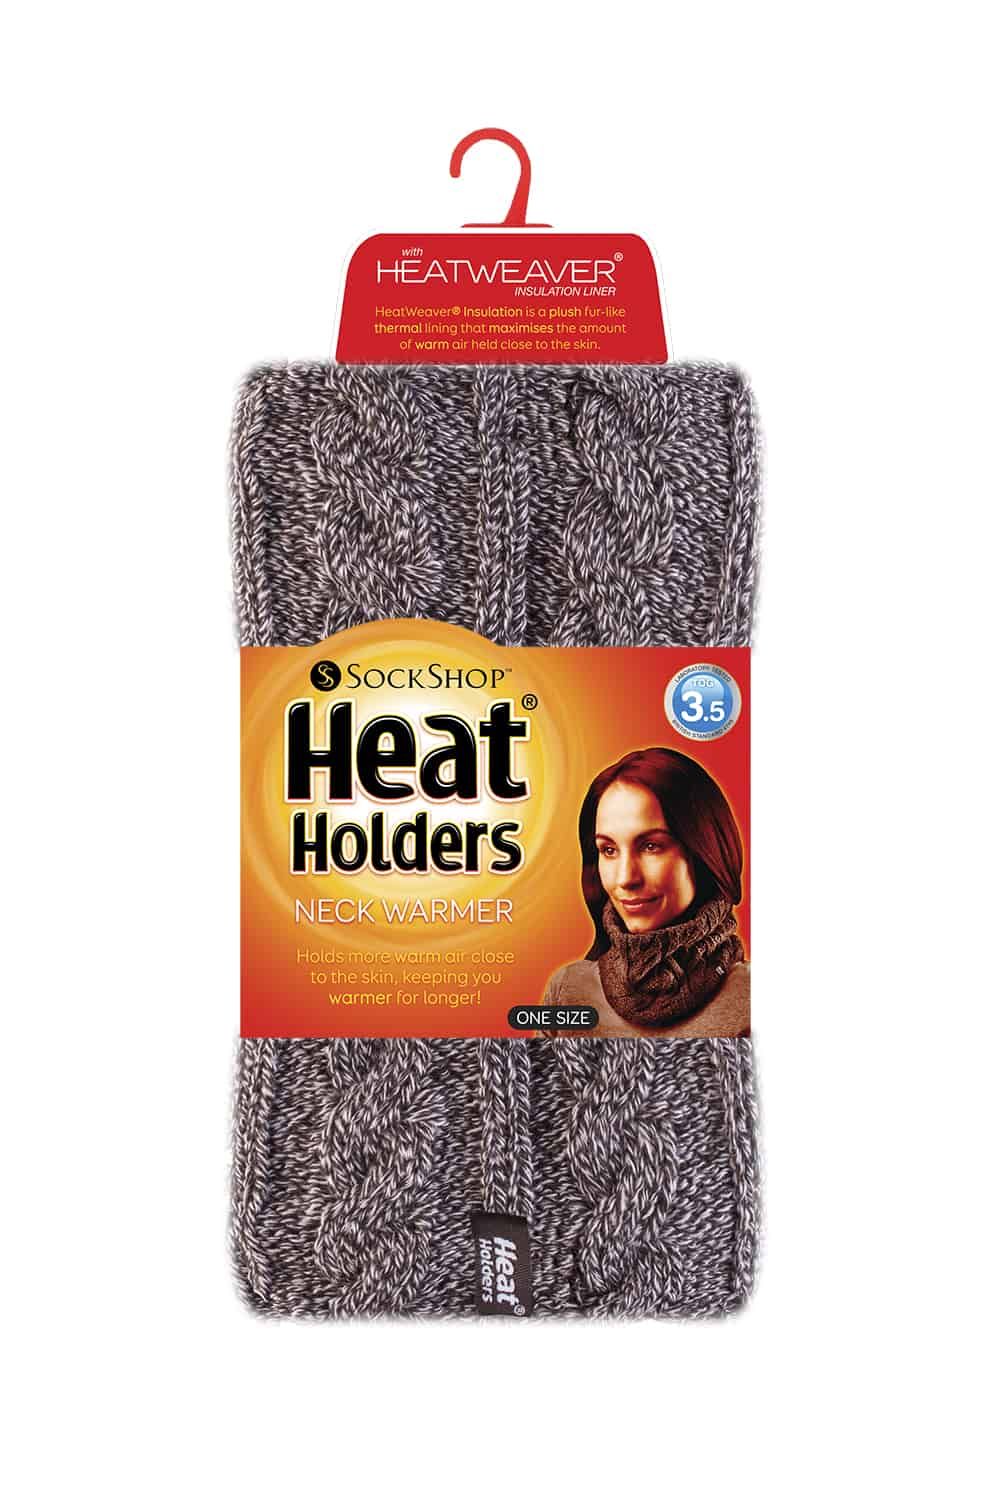 Heat Holders Neck Warmer  When it gets cold, your neck needs something to protect it from the wind and cold weather.Warmer than a regular scarf and less trouble too, this pretty cable knit Heat Holders neck warmer will keep your neck warm in the winter months.  With its delightfully soft, warm and silky fur-like lining, this neck warmer traps the warm air close to the skin and keeps the neck and surround area insulated from the cold.  The advanced, high performance Heat Holders insulating yarn helps protect against the cold and wicks away moisture to keep you dry and comfortable. The specially sculpted fit of this neck warmer drops low to contour around the chest, neck and chin for extra warmth and protection.  Extra Product Details  - Neck Warmer - Heat Holders - Heatweaver fleece lining - Insulating yarn - Sculpted to fit neck - Easier to wear than a scarf - 7 colours  - One size fits all - 3.5 Tog